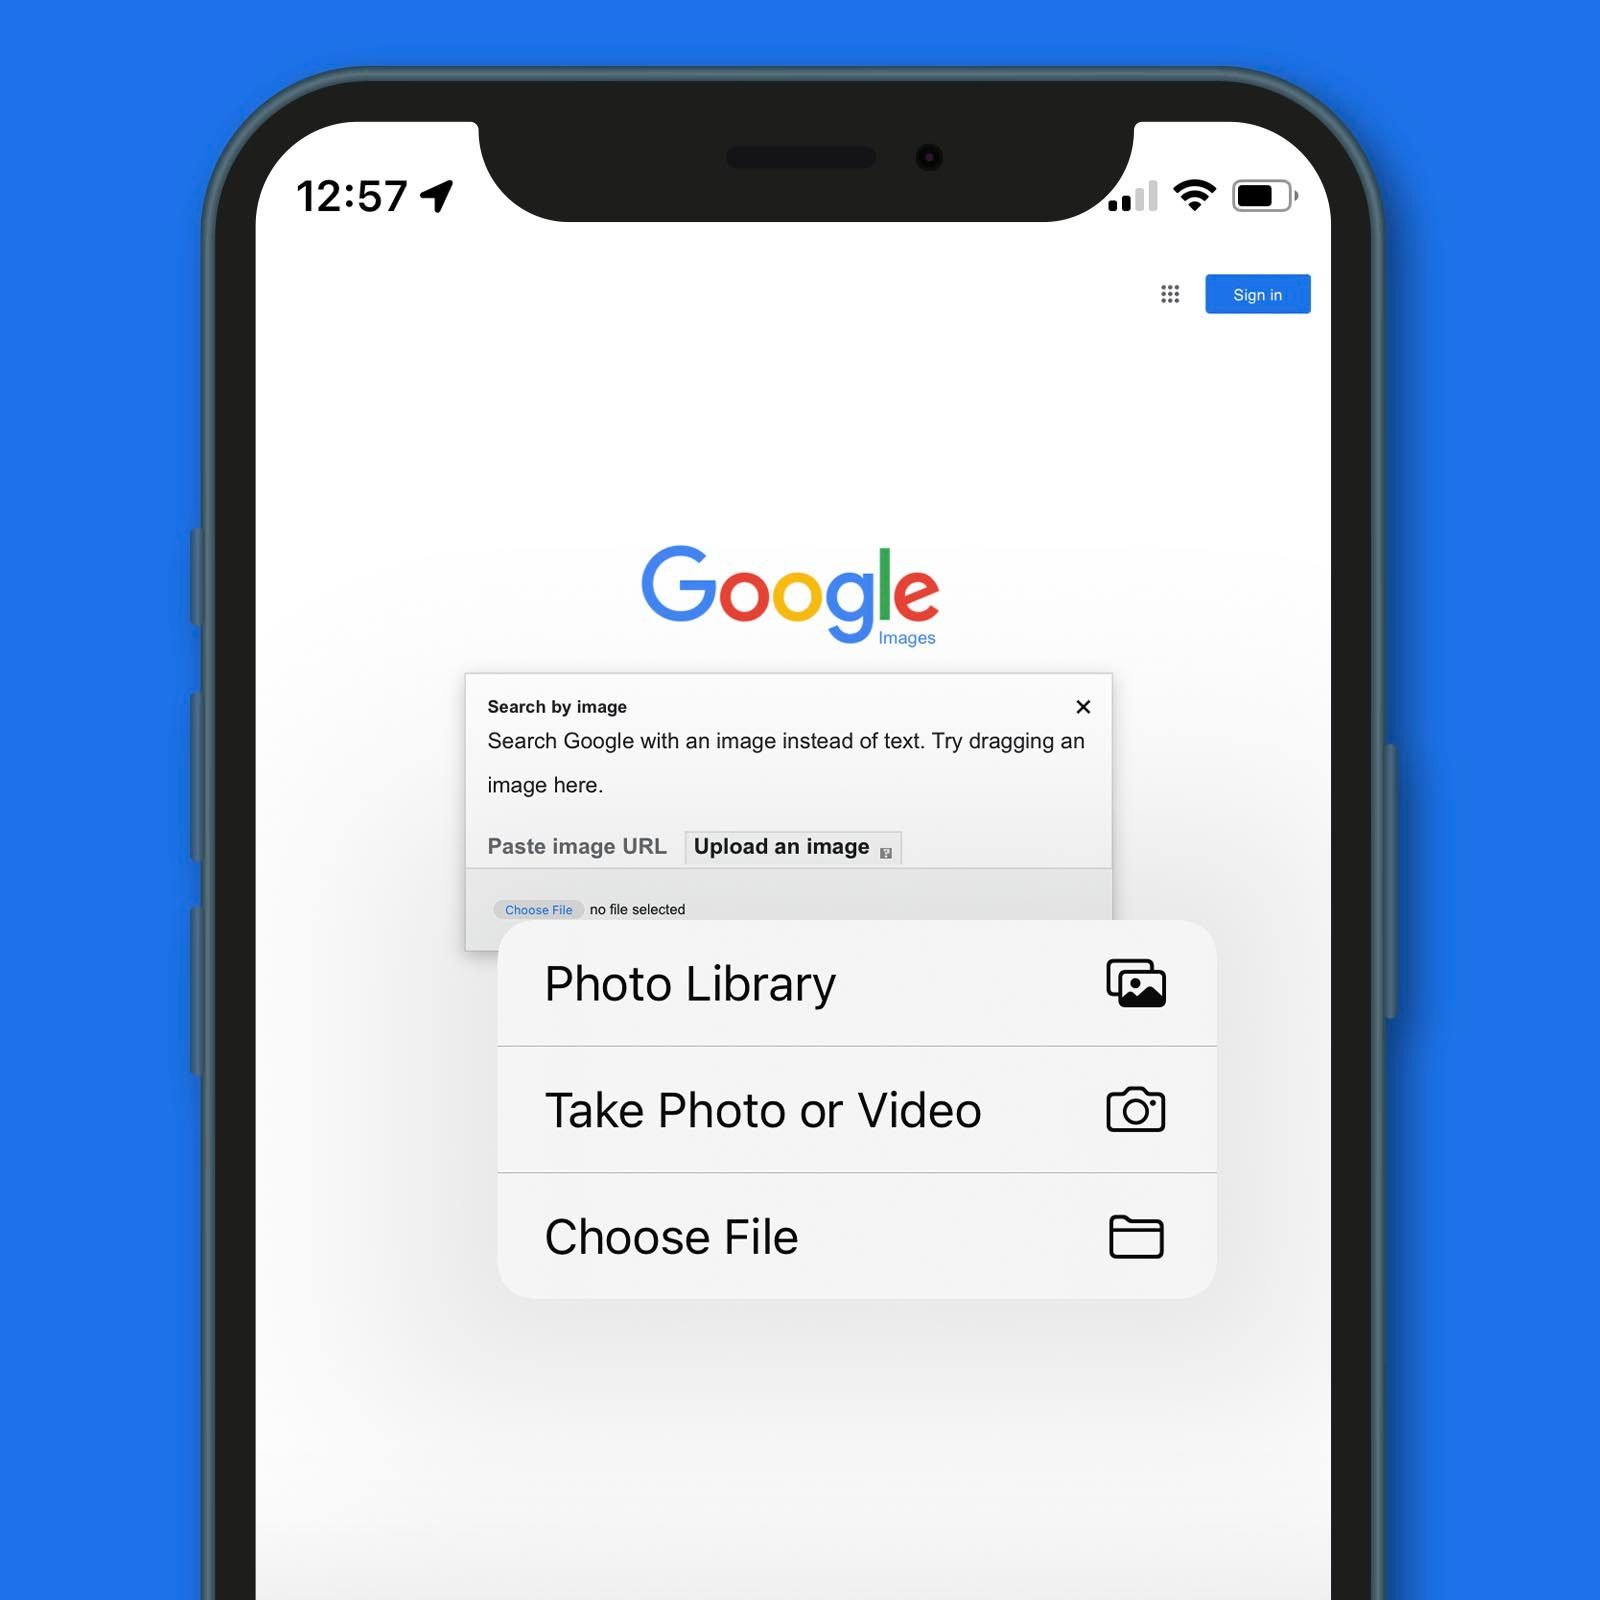 How To Do A Reverse Image Search On Iphone: A Step-By-Step Guide